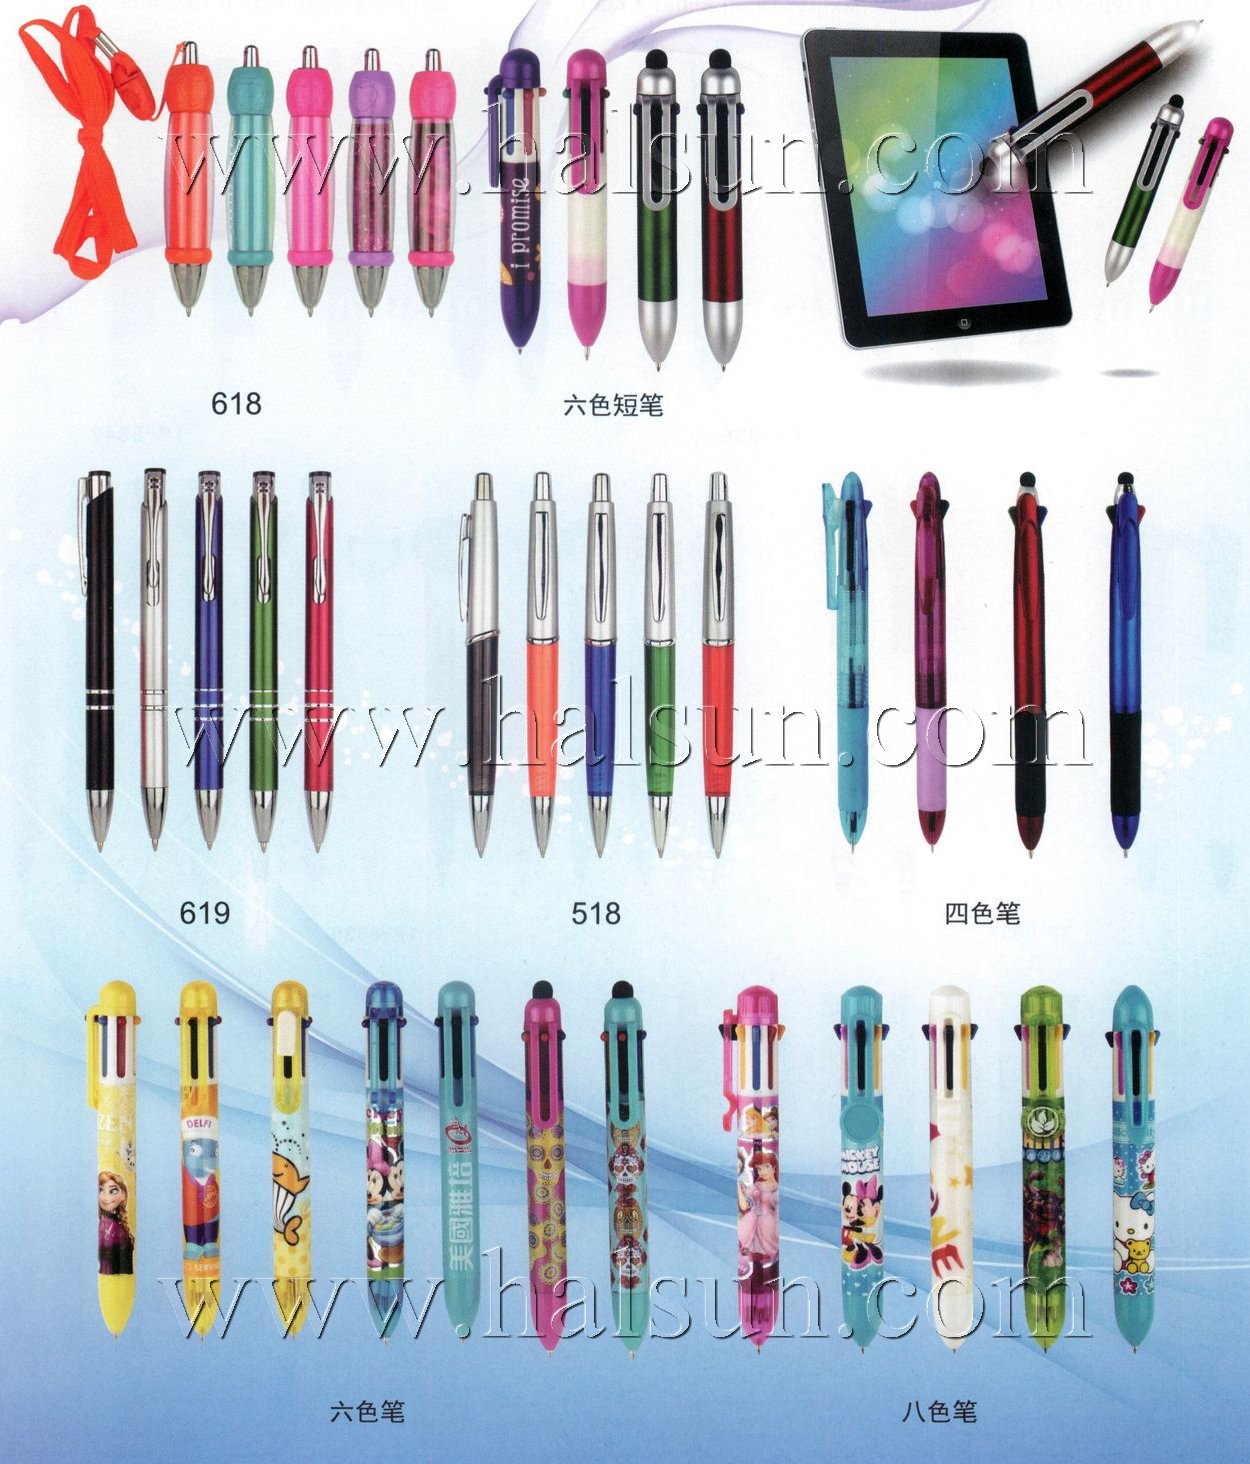 Mini 6 color pens with stylus, 4 color pens with stylus,6 color pens with stylus,,Stylus Pens_Ball Pens_2014_09_21_15_02_47